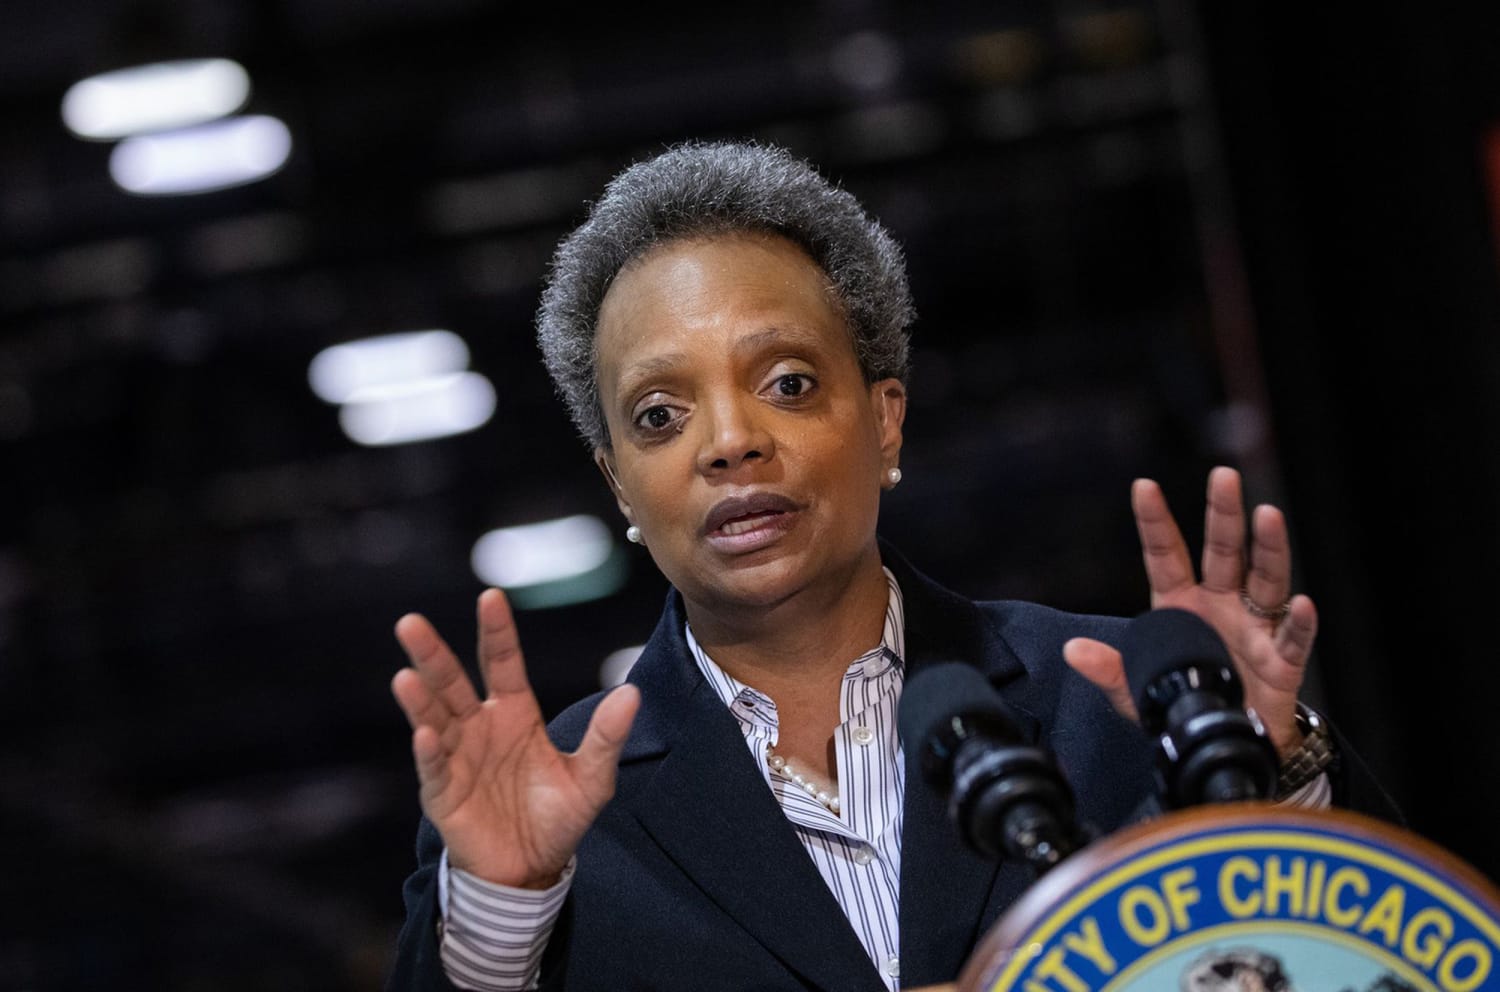 Chicago mayor criticized after city lawyers try to suppress video of botched police raid